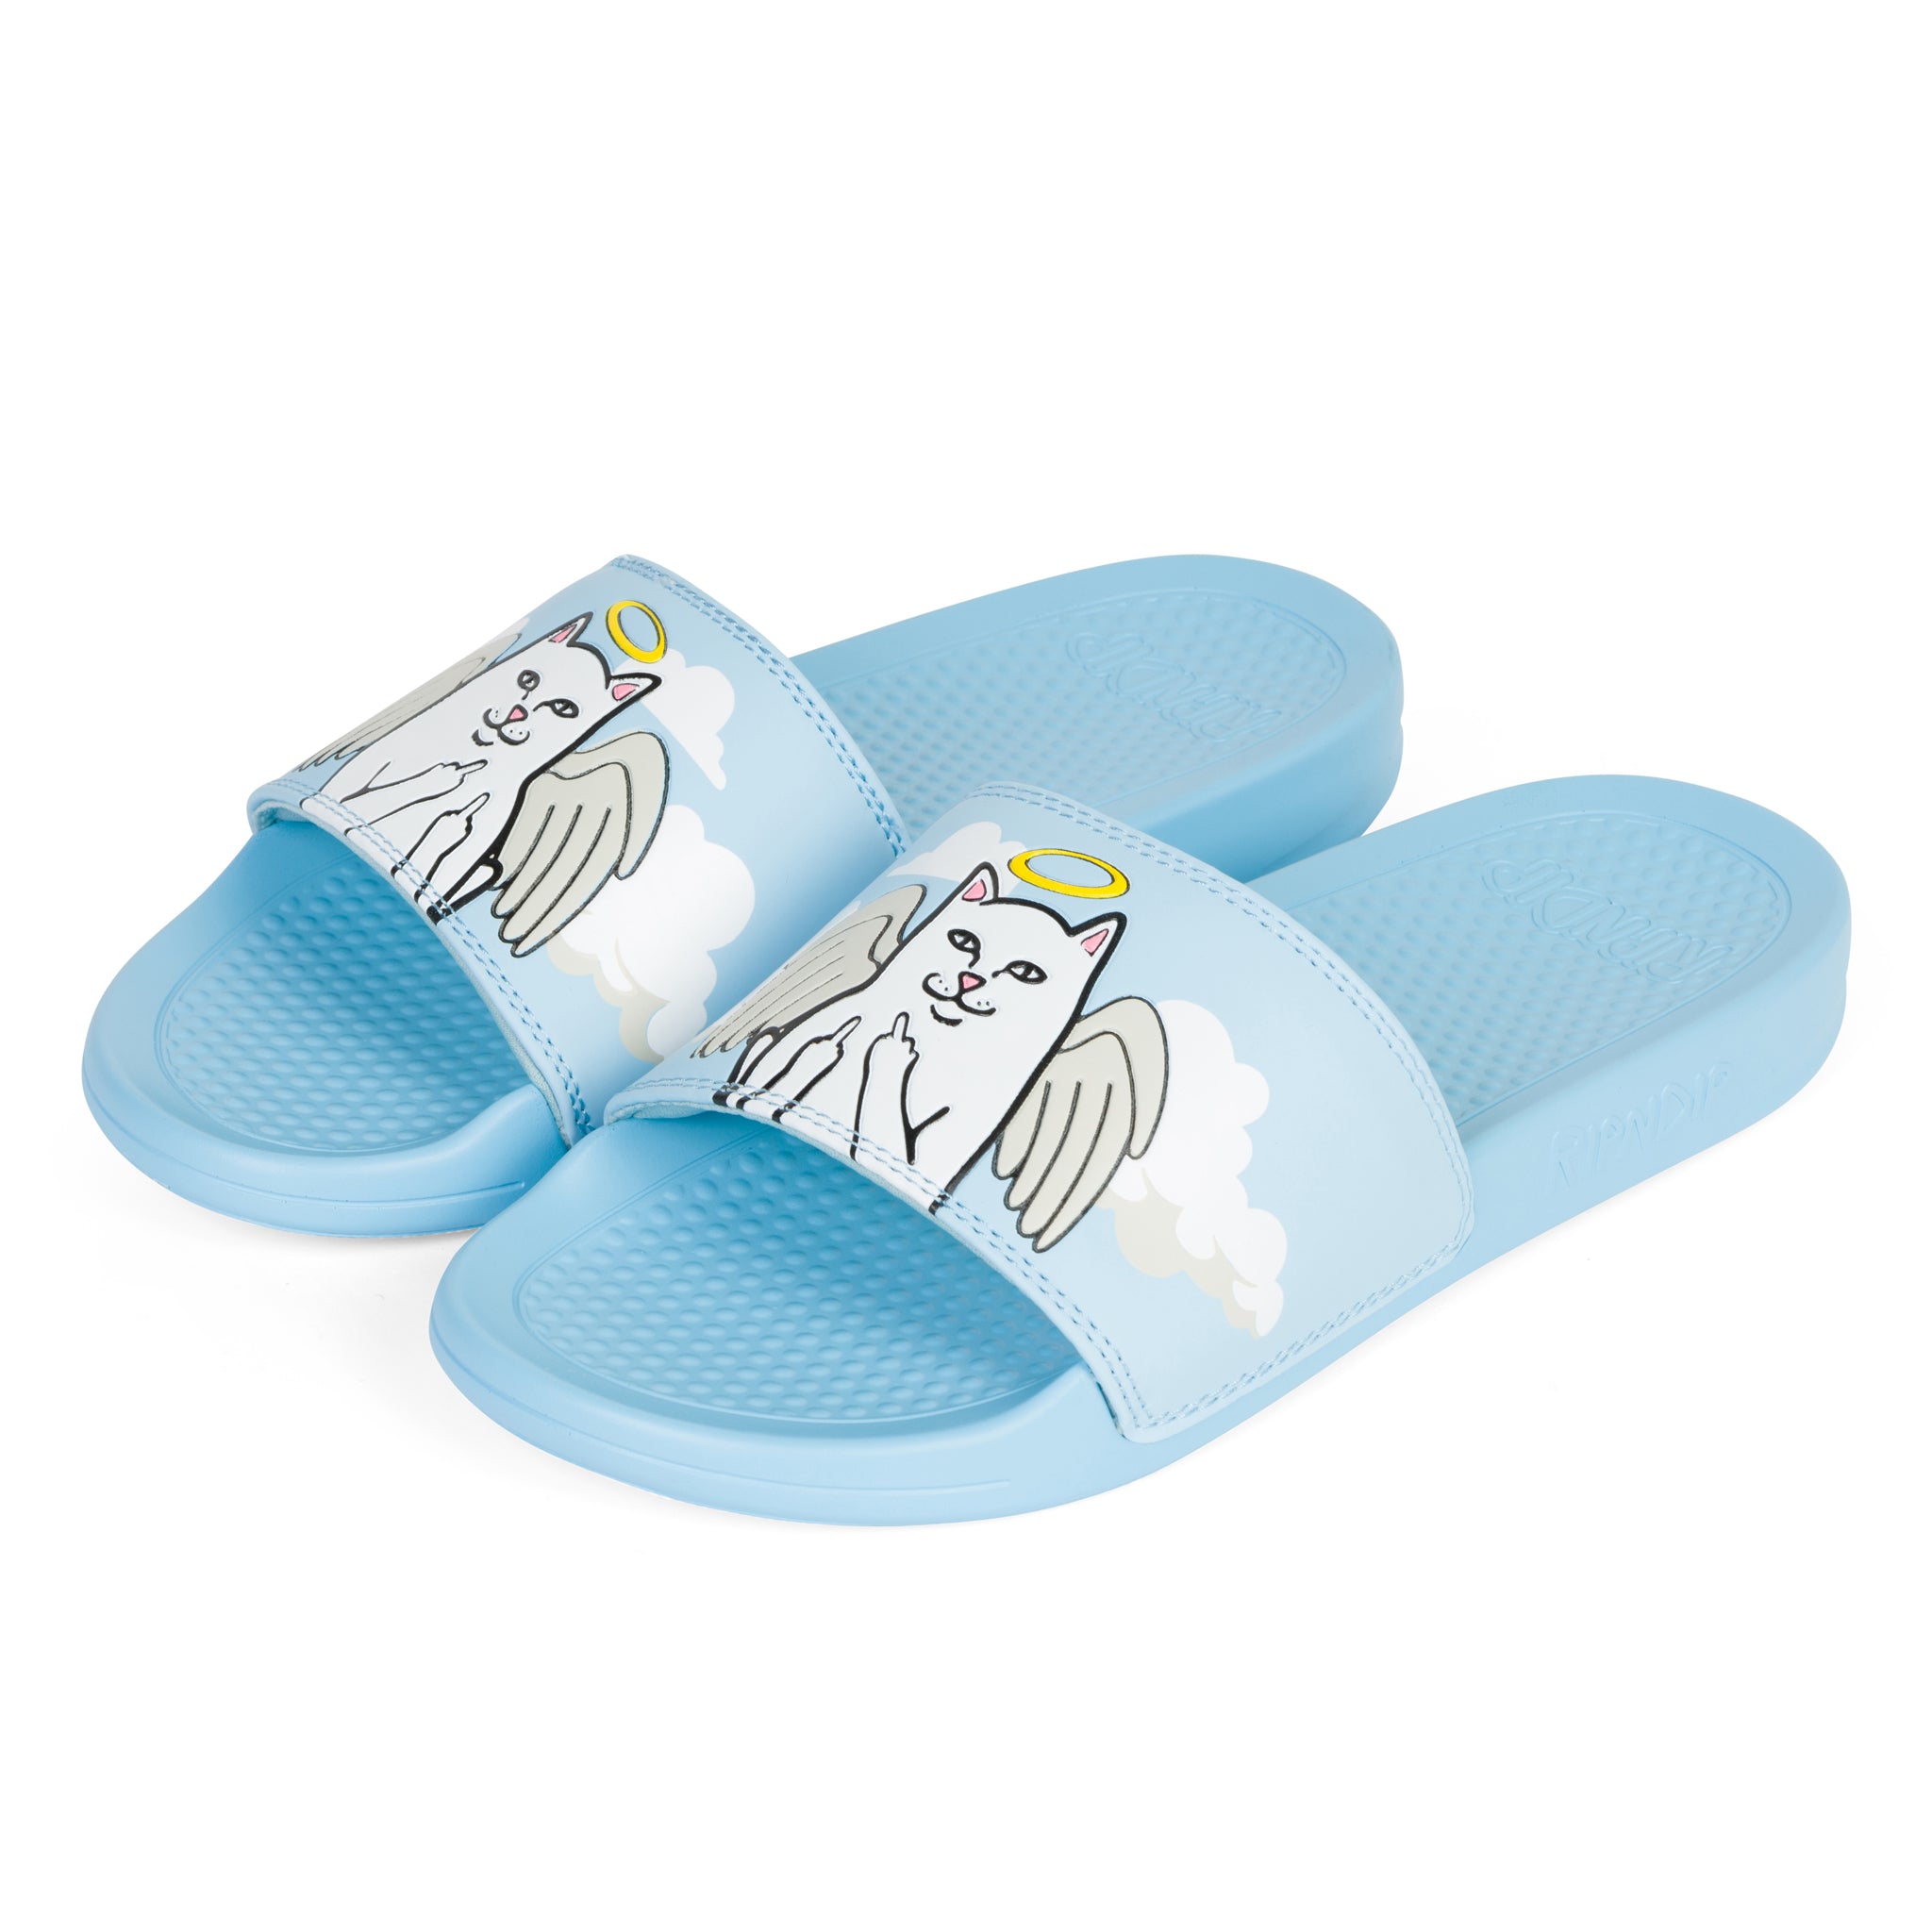 Lord Angel Slides (Baby Blue)